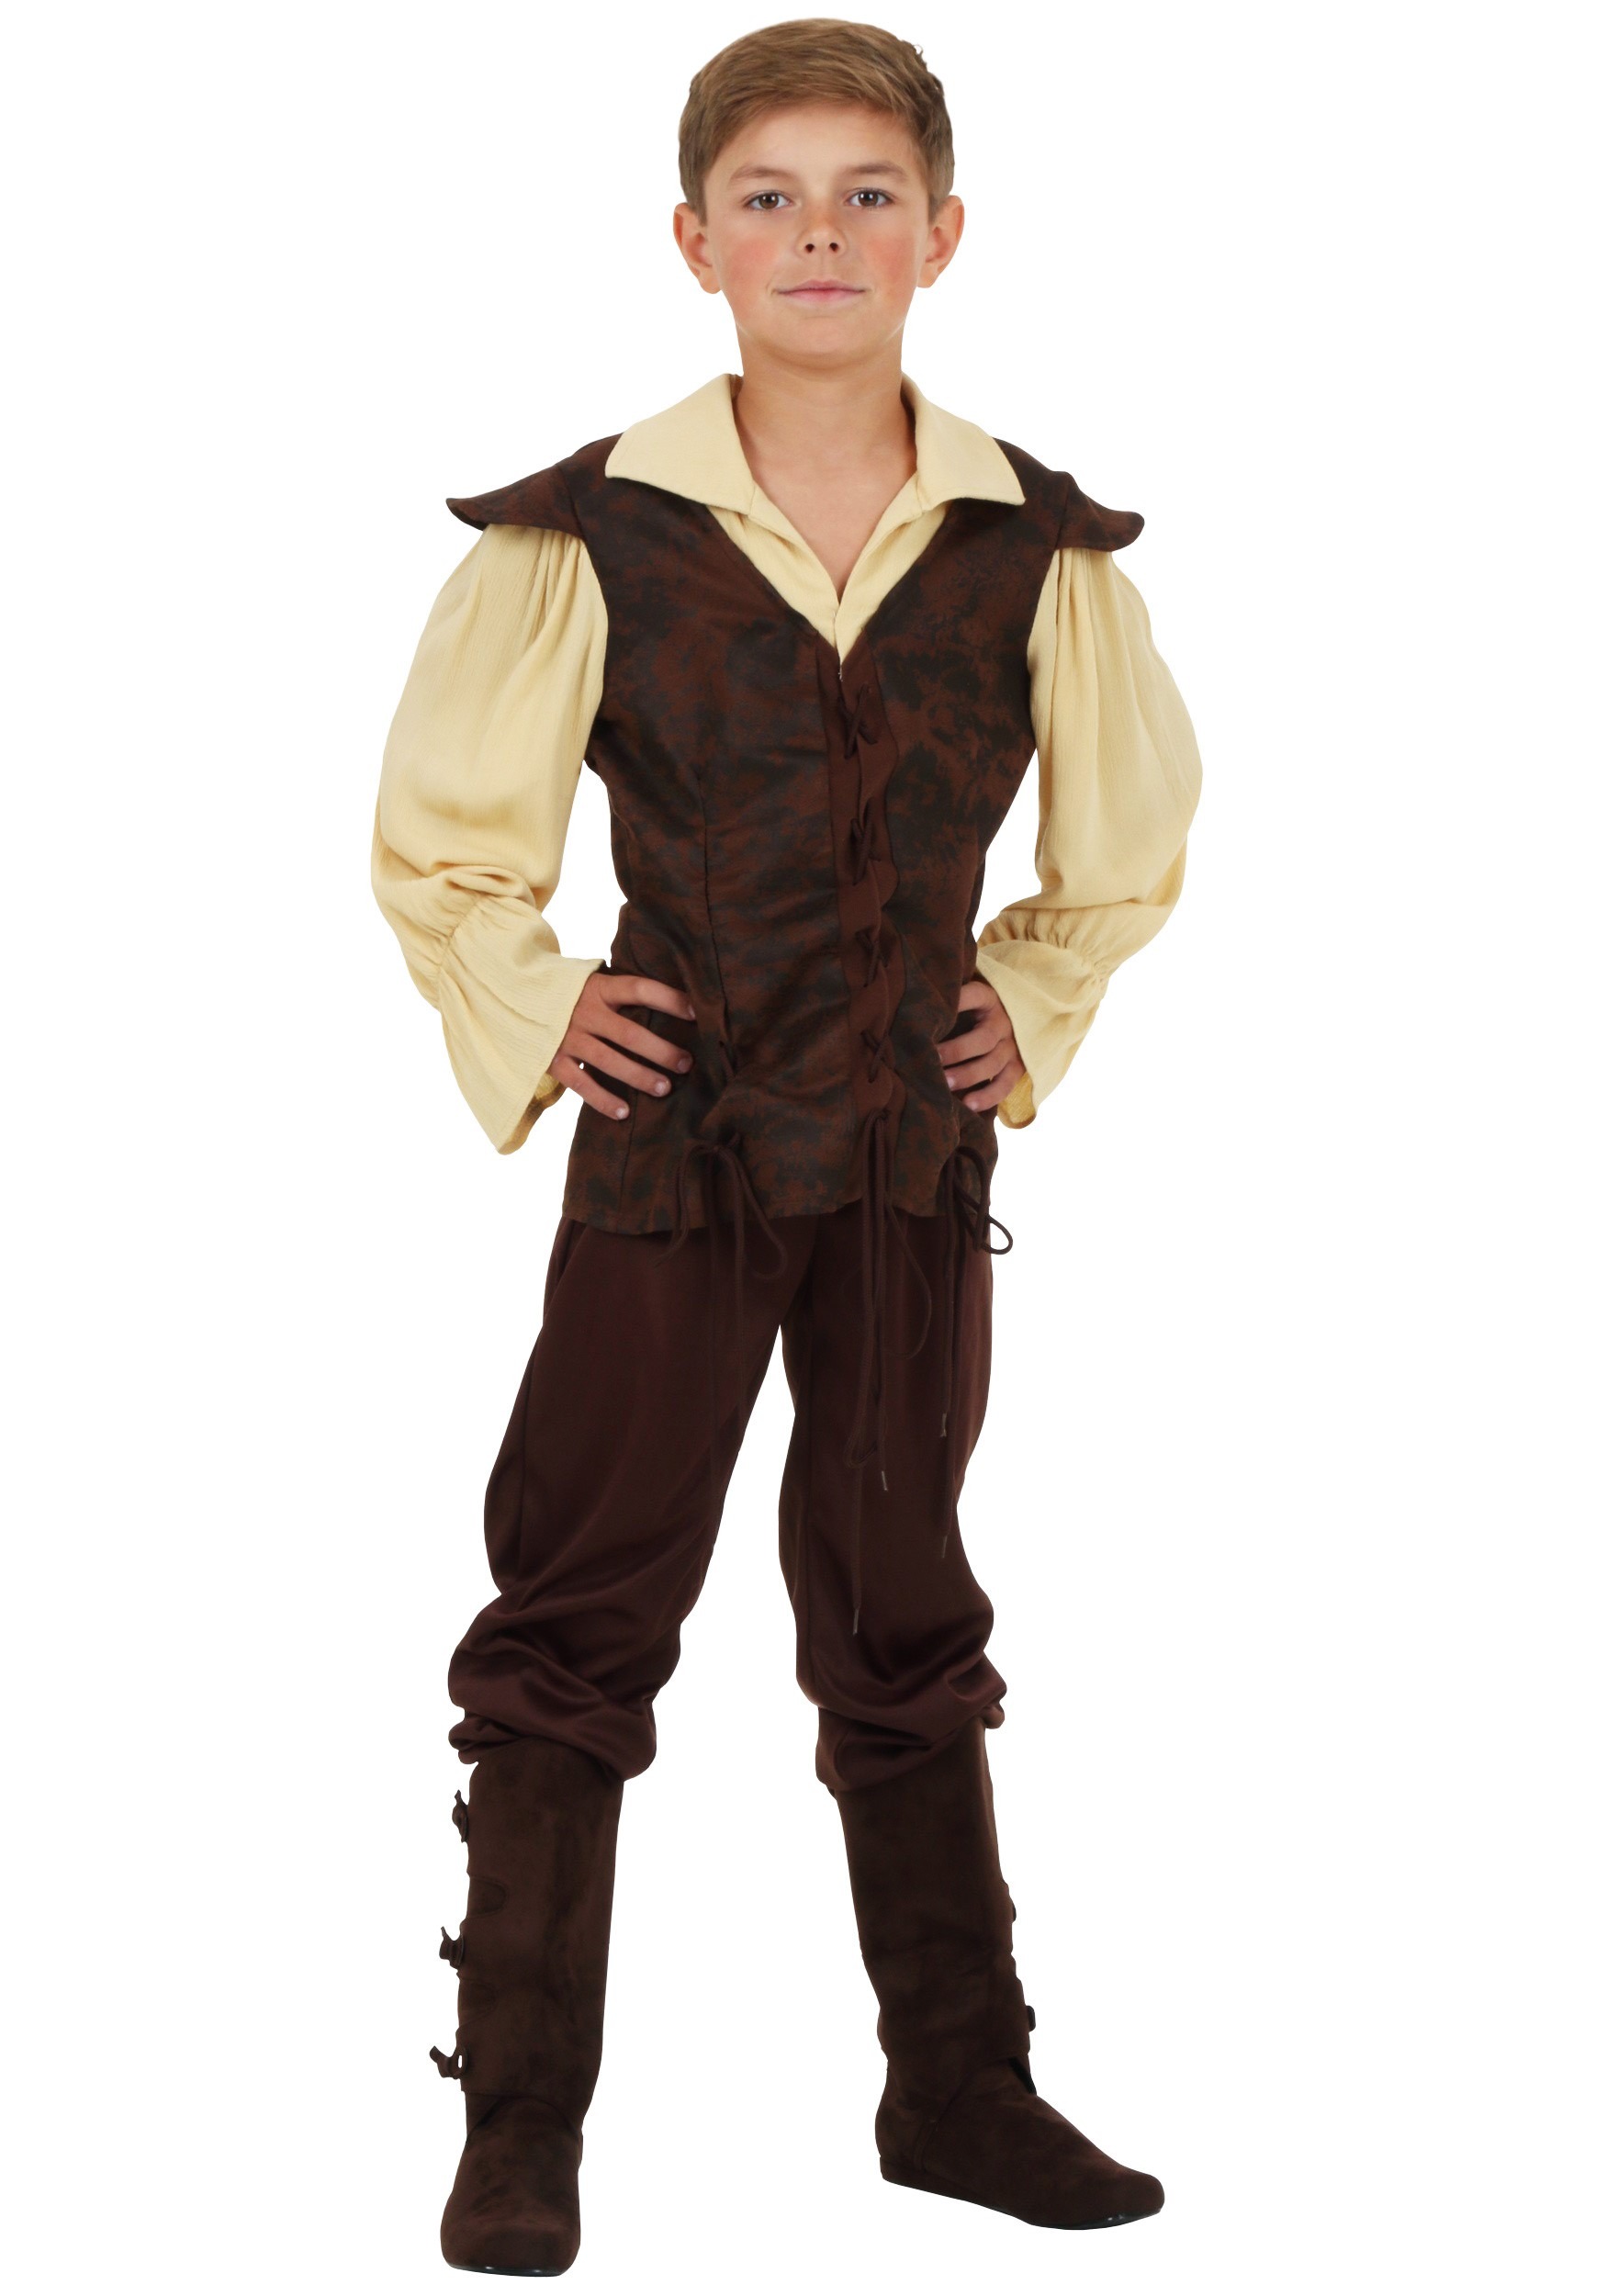 Photos - Fancy Dress Squire FUN Costumes Renaissance  Costume for Boys Brown/Yellow FUN6074C 